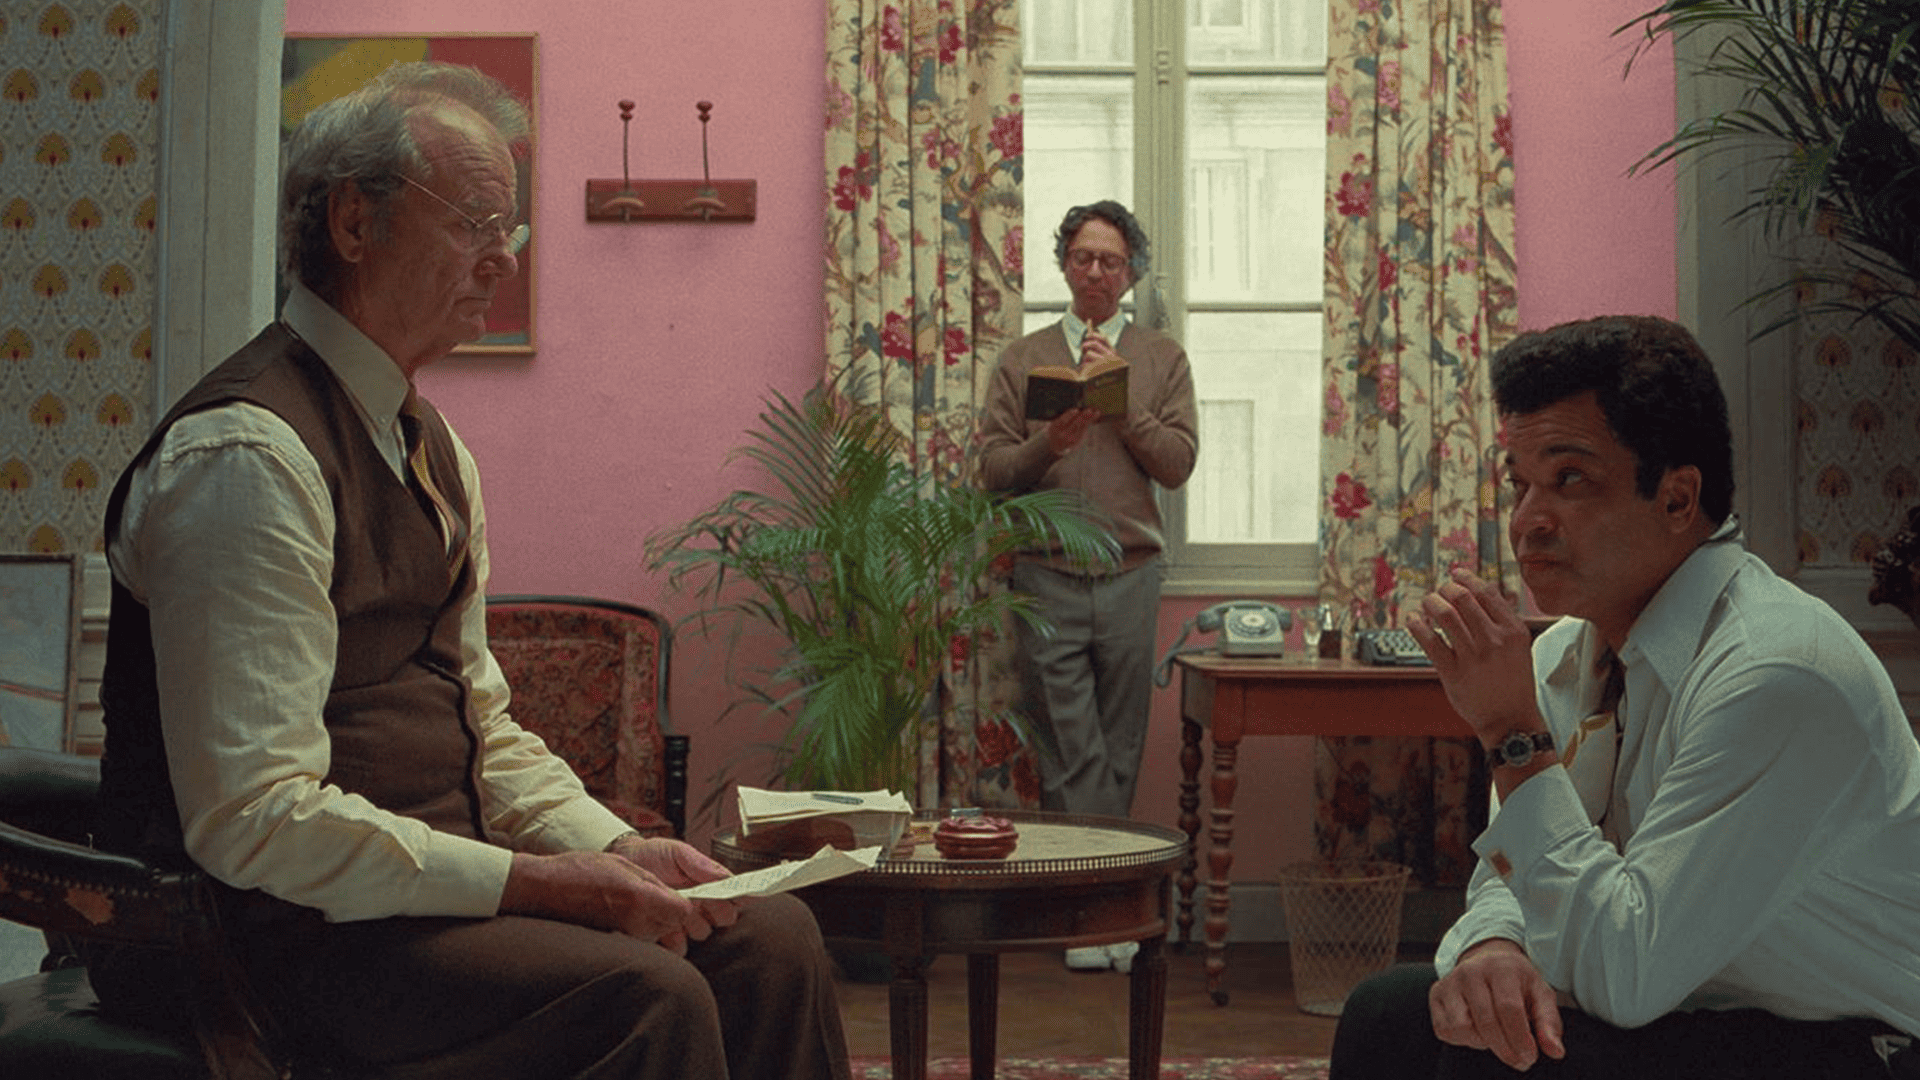 Bill Murray, Wallace Wolodarsky, and Jeffrey Wright in a room with a pink wall in this image from Indian Paintbrush